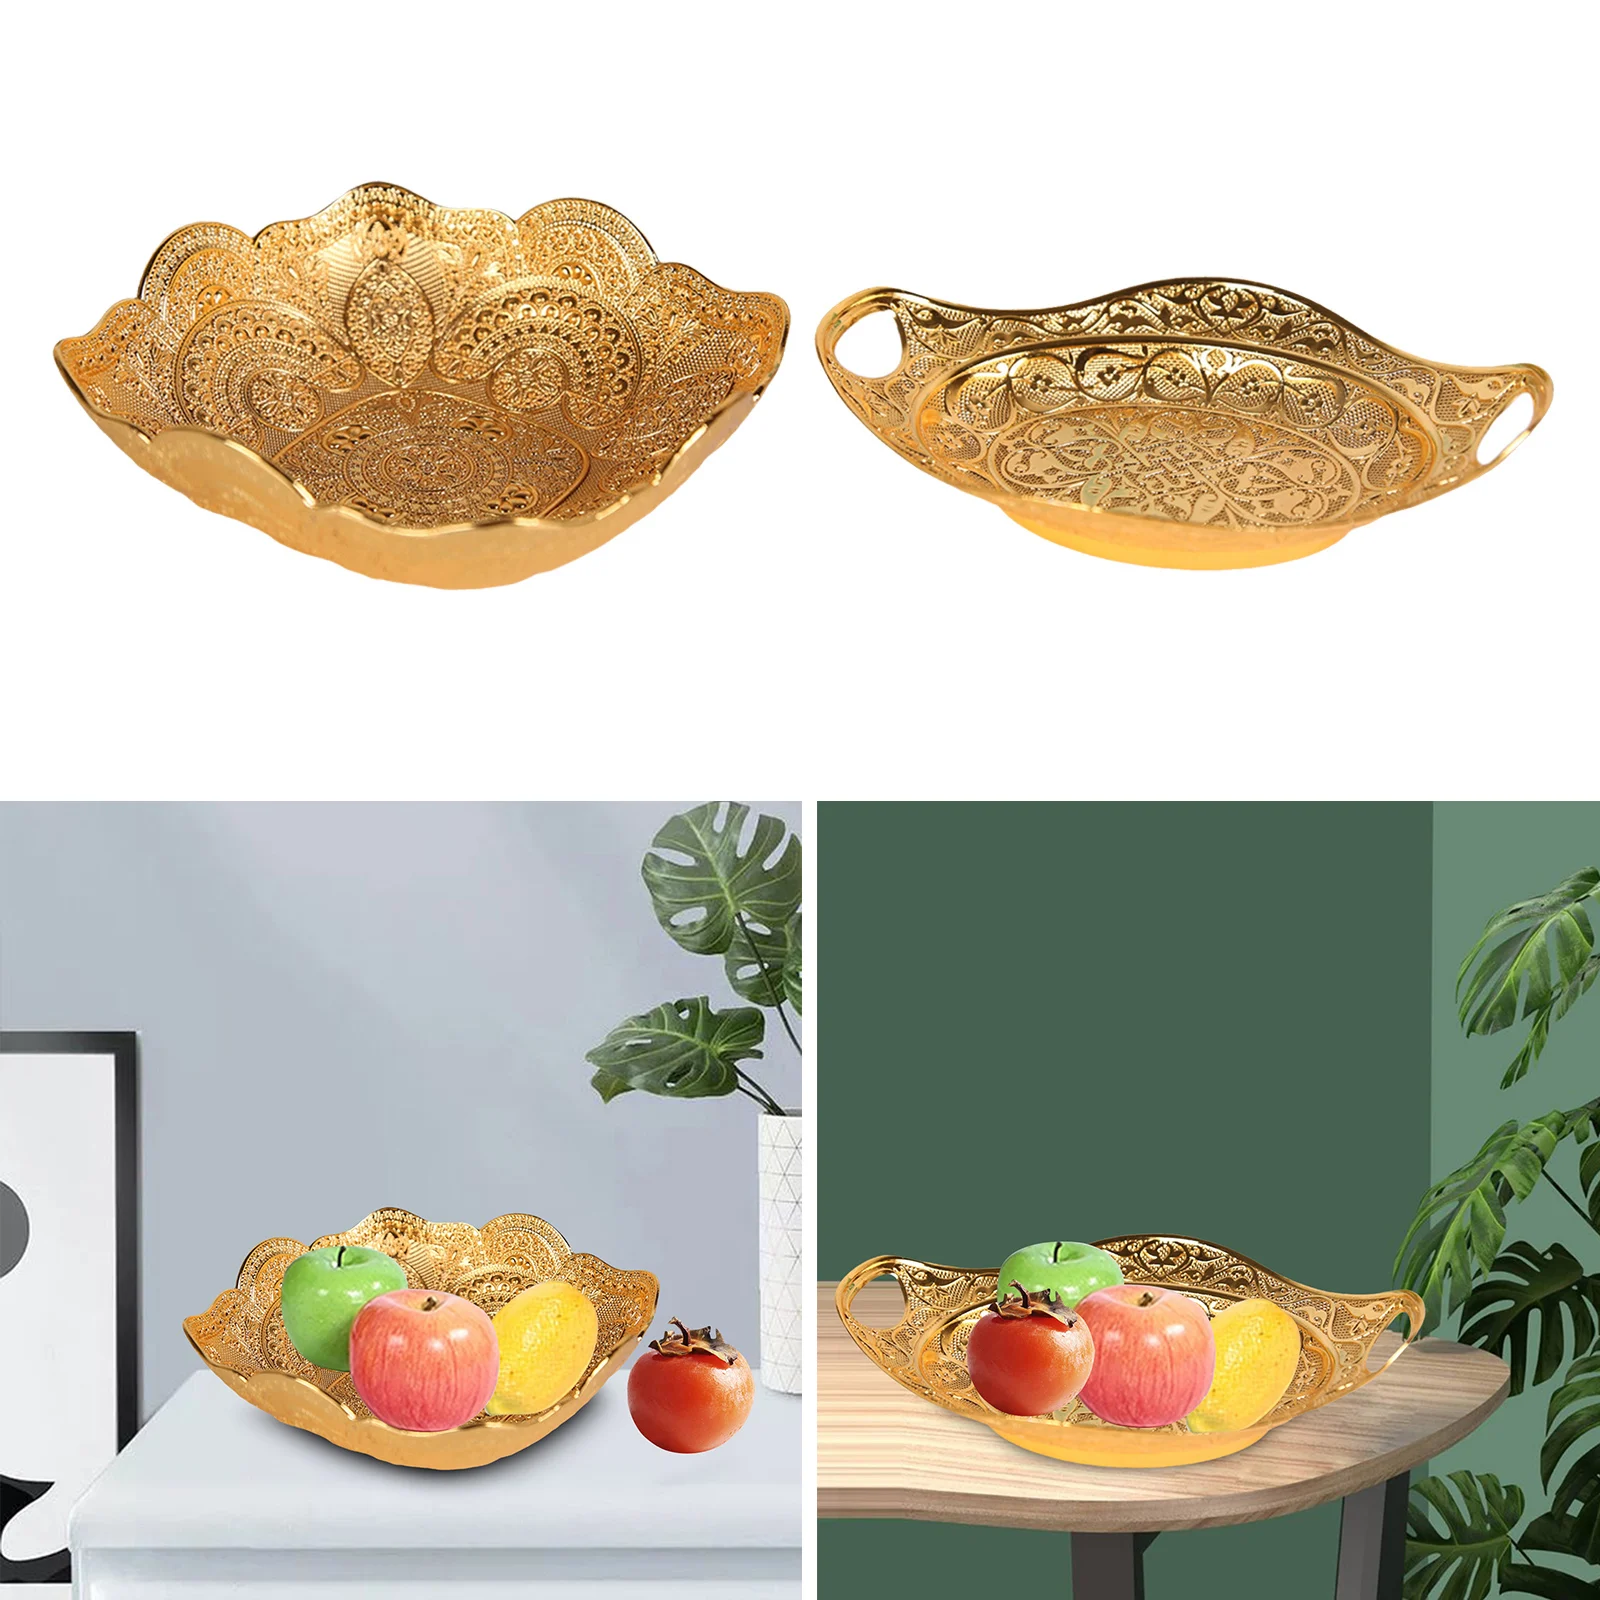 Gold Fruit Plate Trinket Jewelry Earrings Necklace Dish Cupcake Snack Tray Bowl Platter for Centerpiece Wedding Party Decor